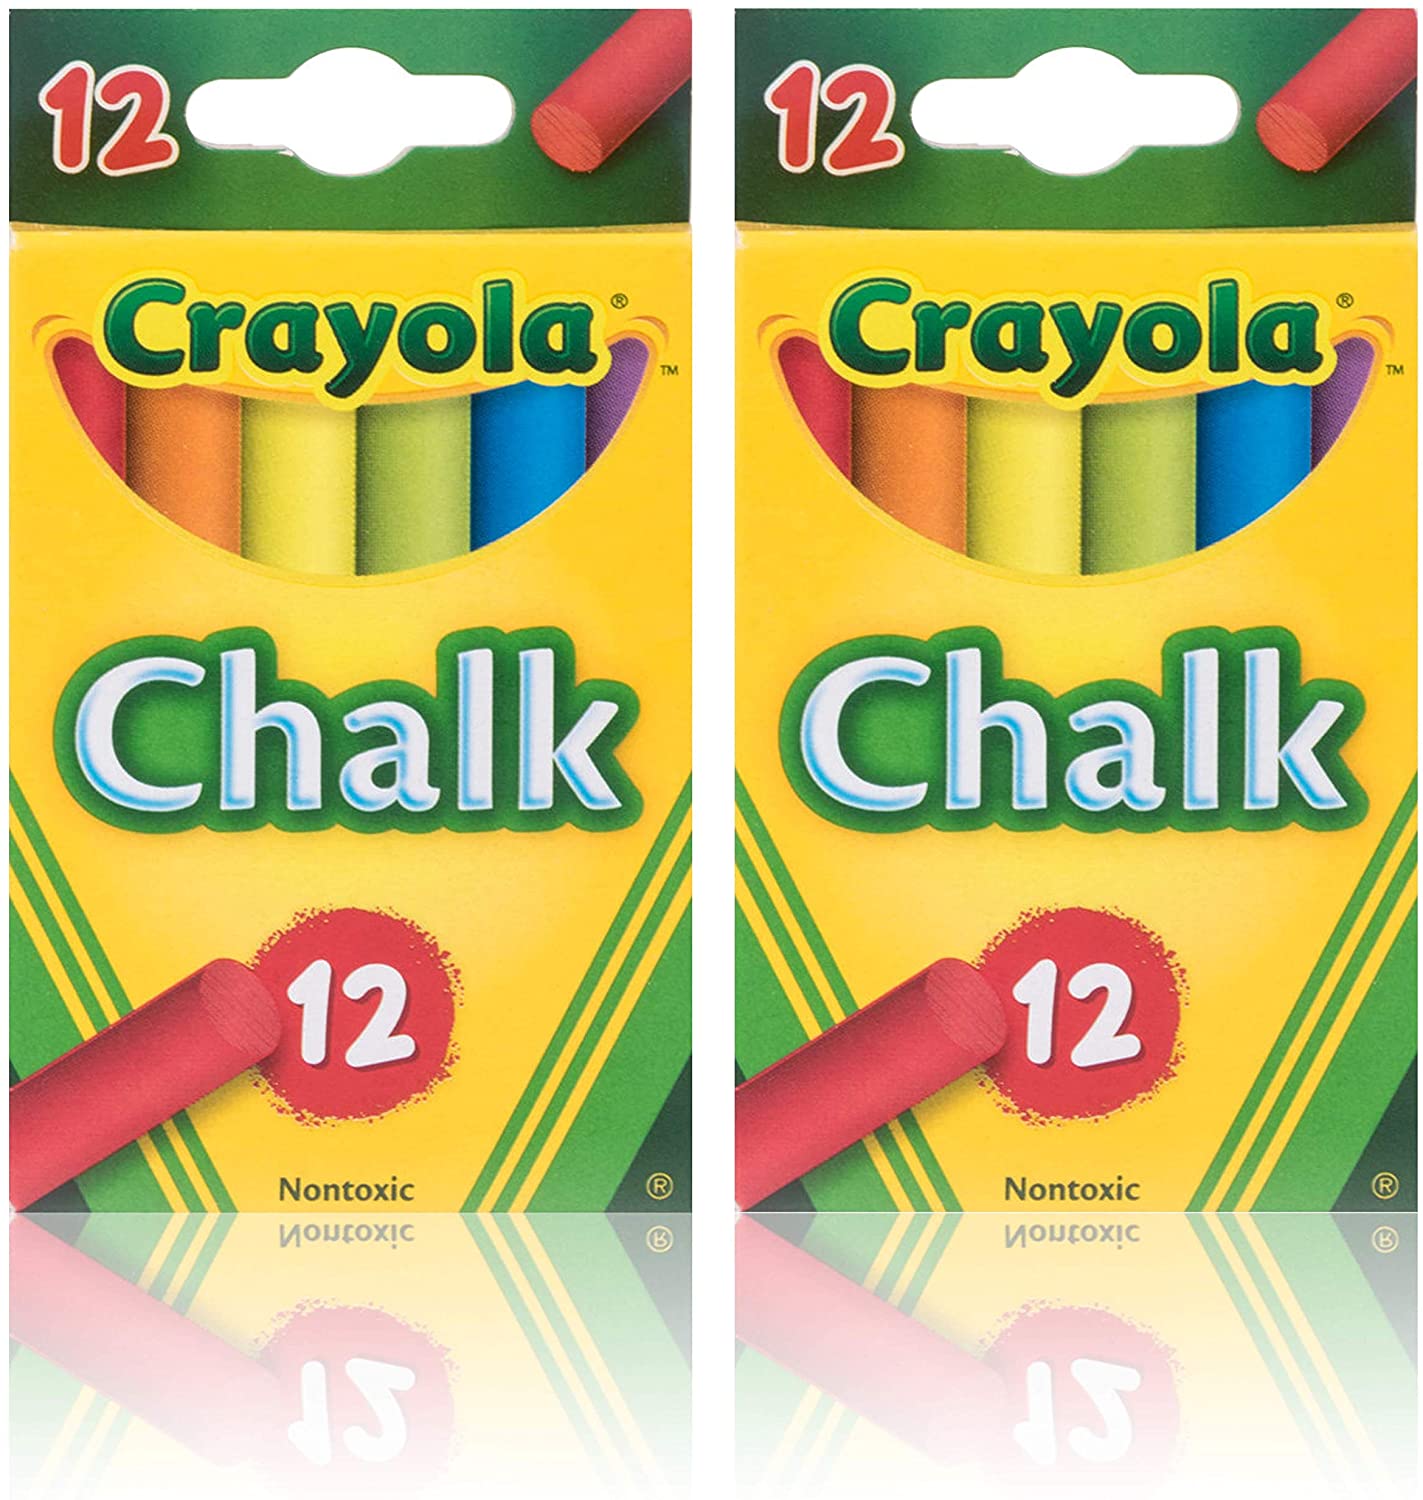 Crayola Chalk, Assorted Colors 24-Count Draws Write Smooth Clean lines Non-Toxic - Pack of 2